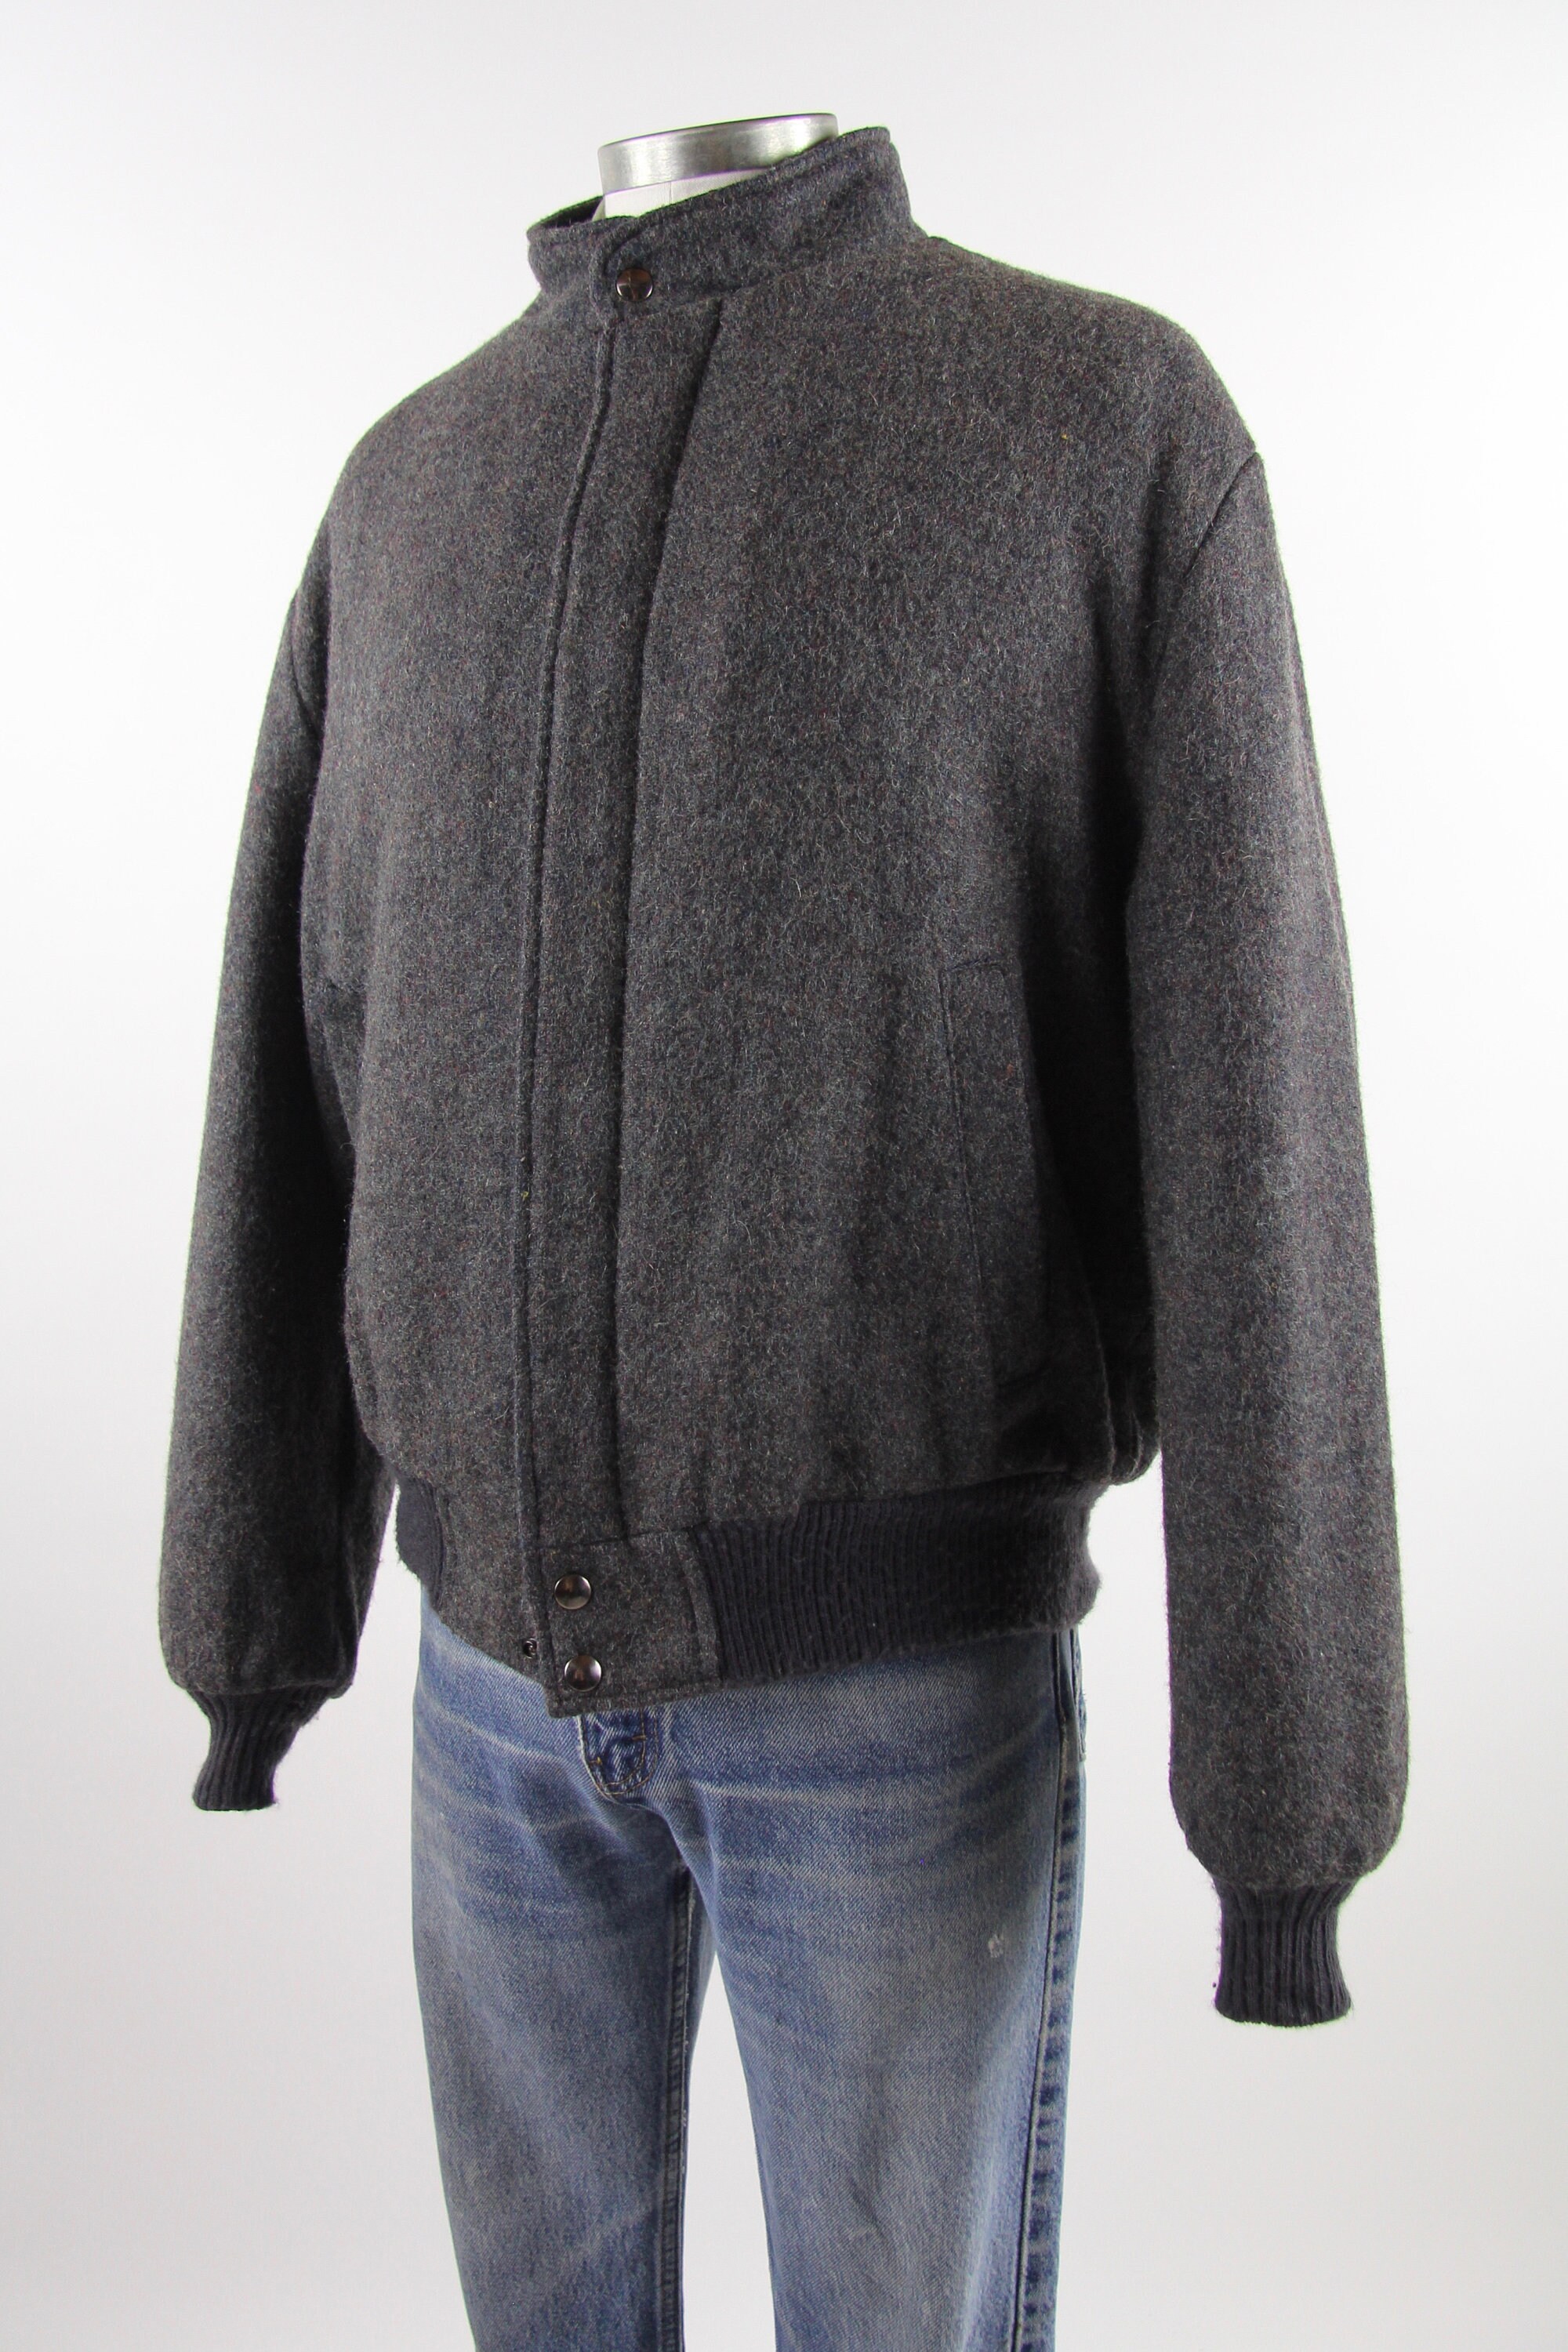 Field and Stream Wool Sherpa Men's Jacket Made in USA Vintage Size Large